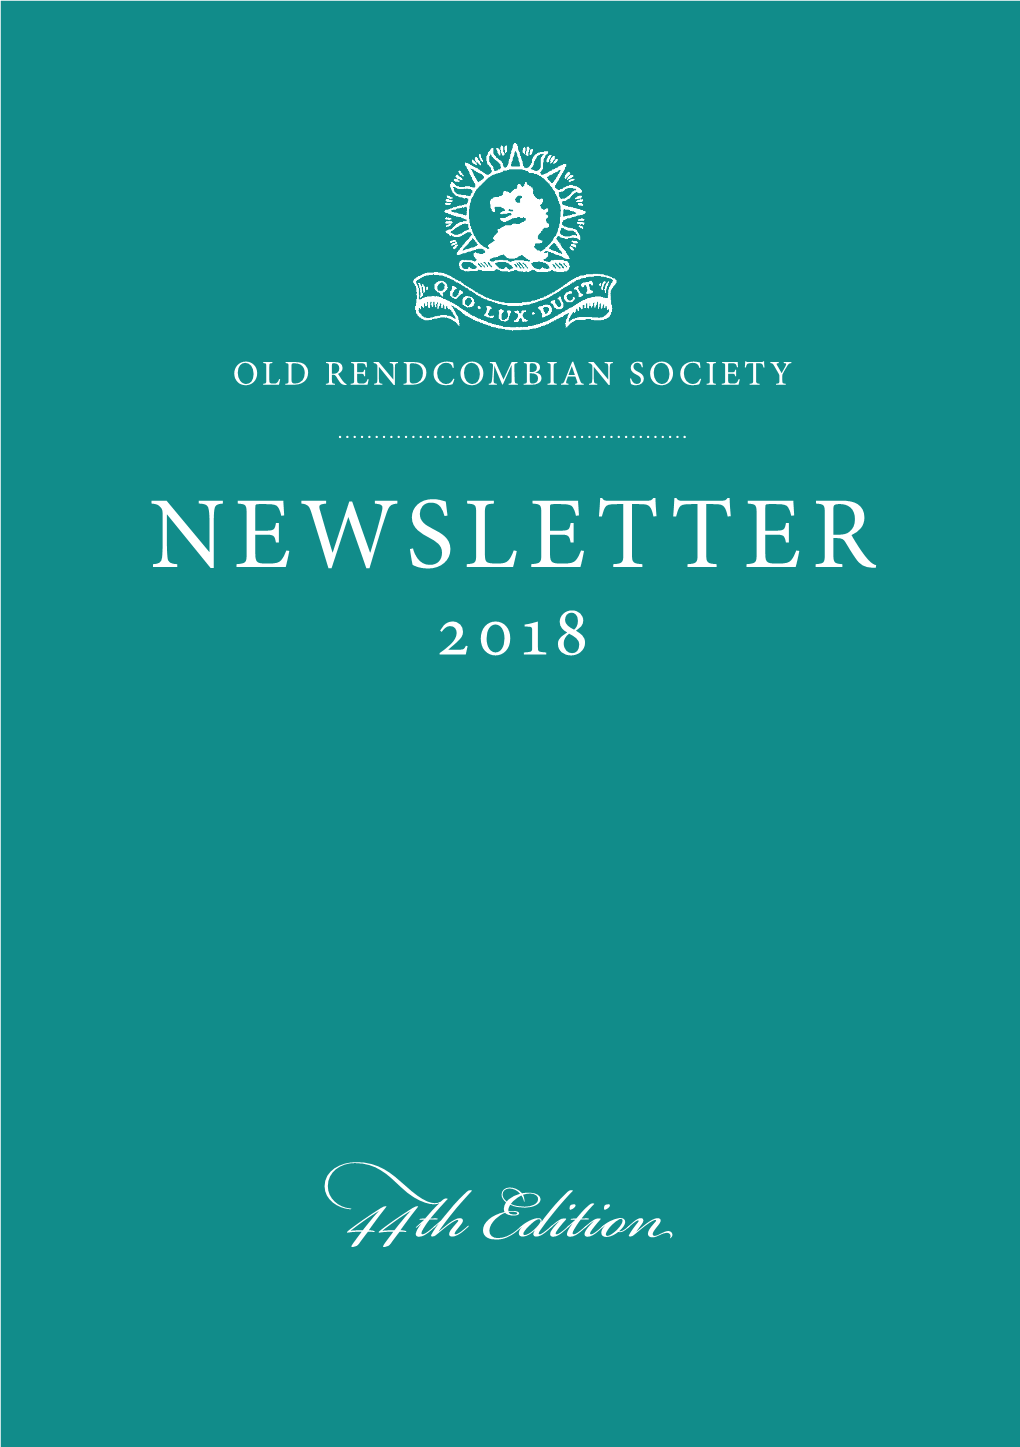 Old Rendcombian Society Newsletter 2018